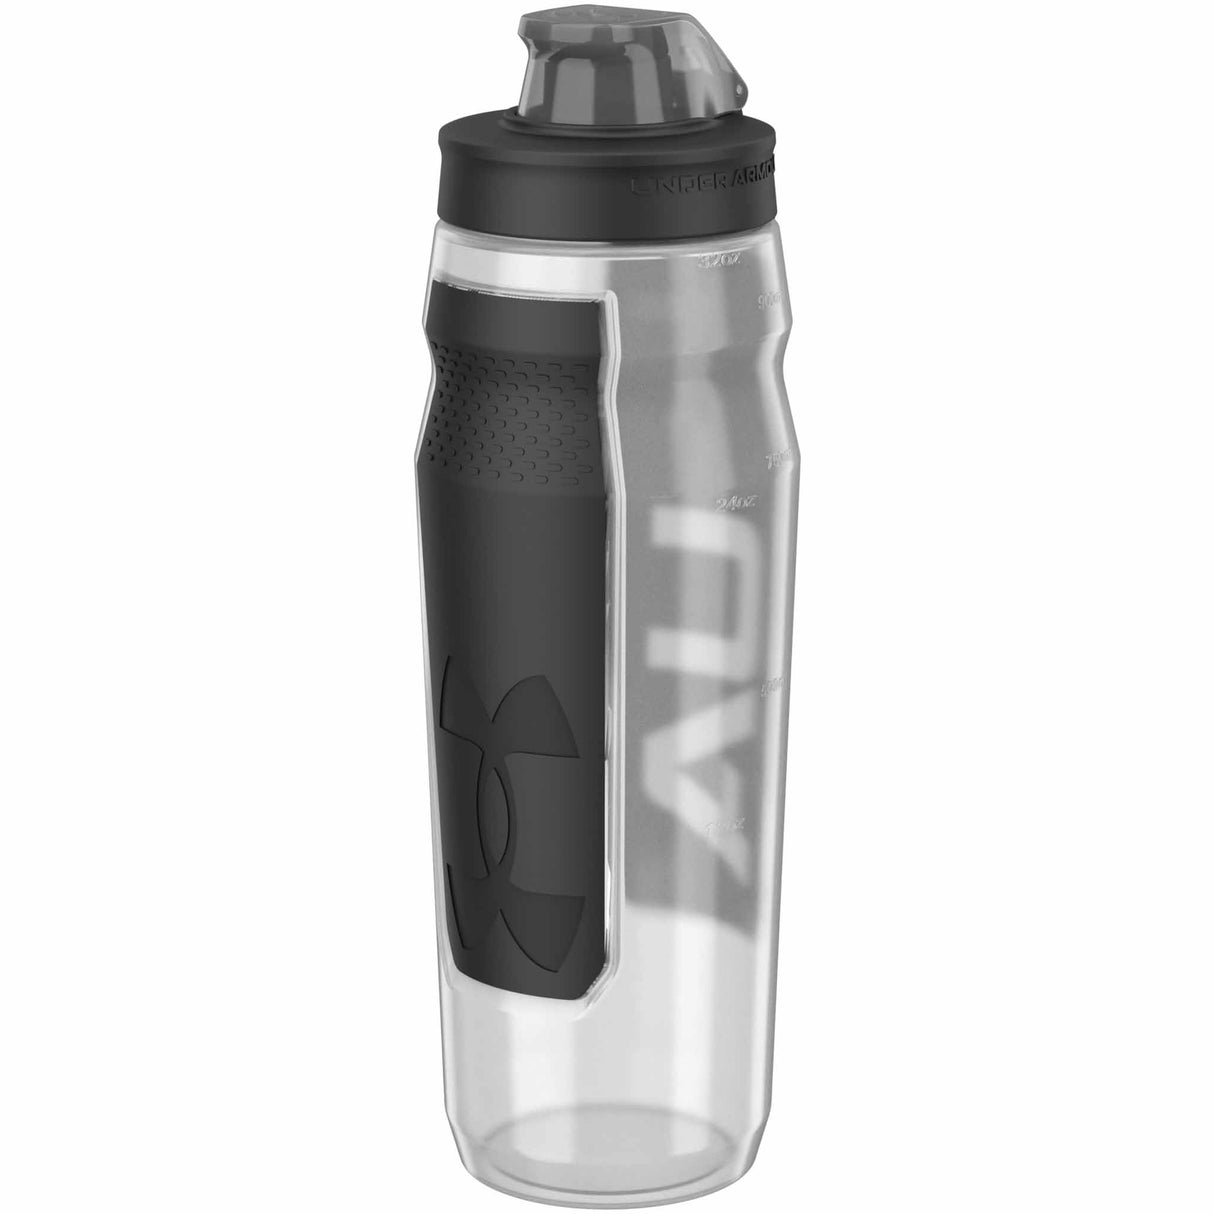 Under Armour Playmaker Squeeze bouteille d'hydratation sport 32 oz - Clear